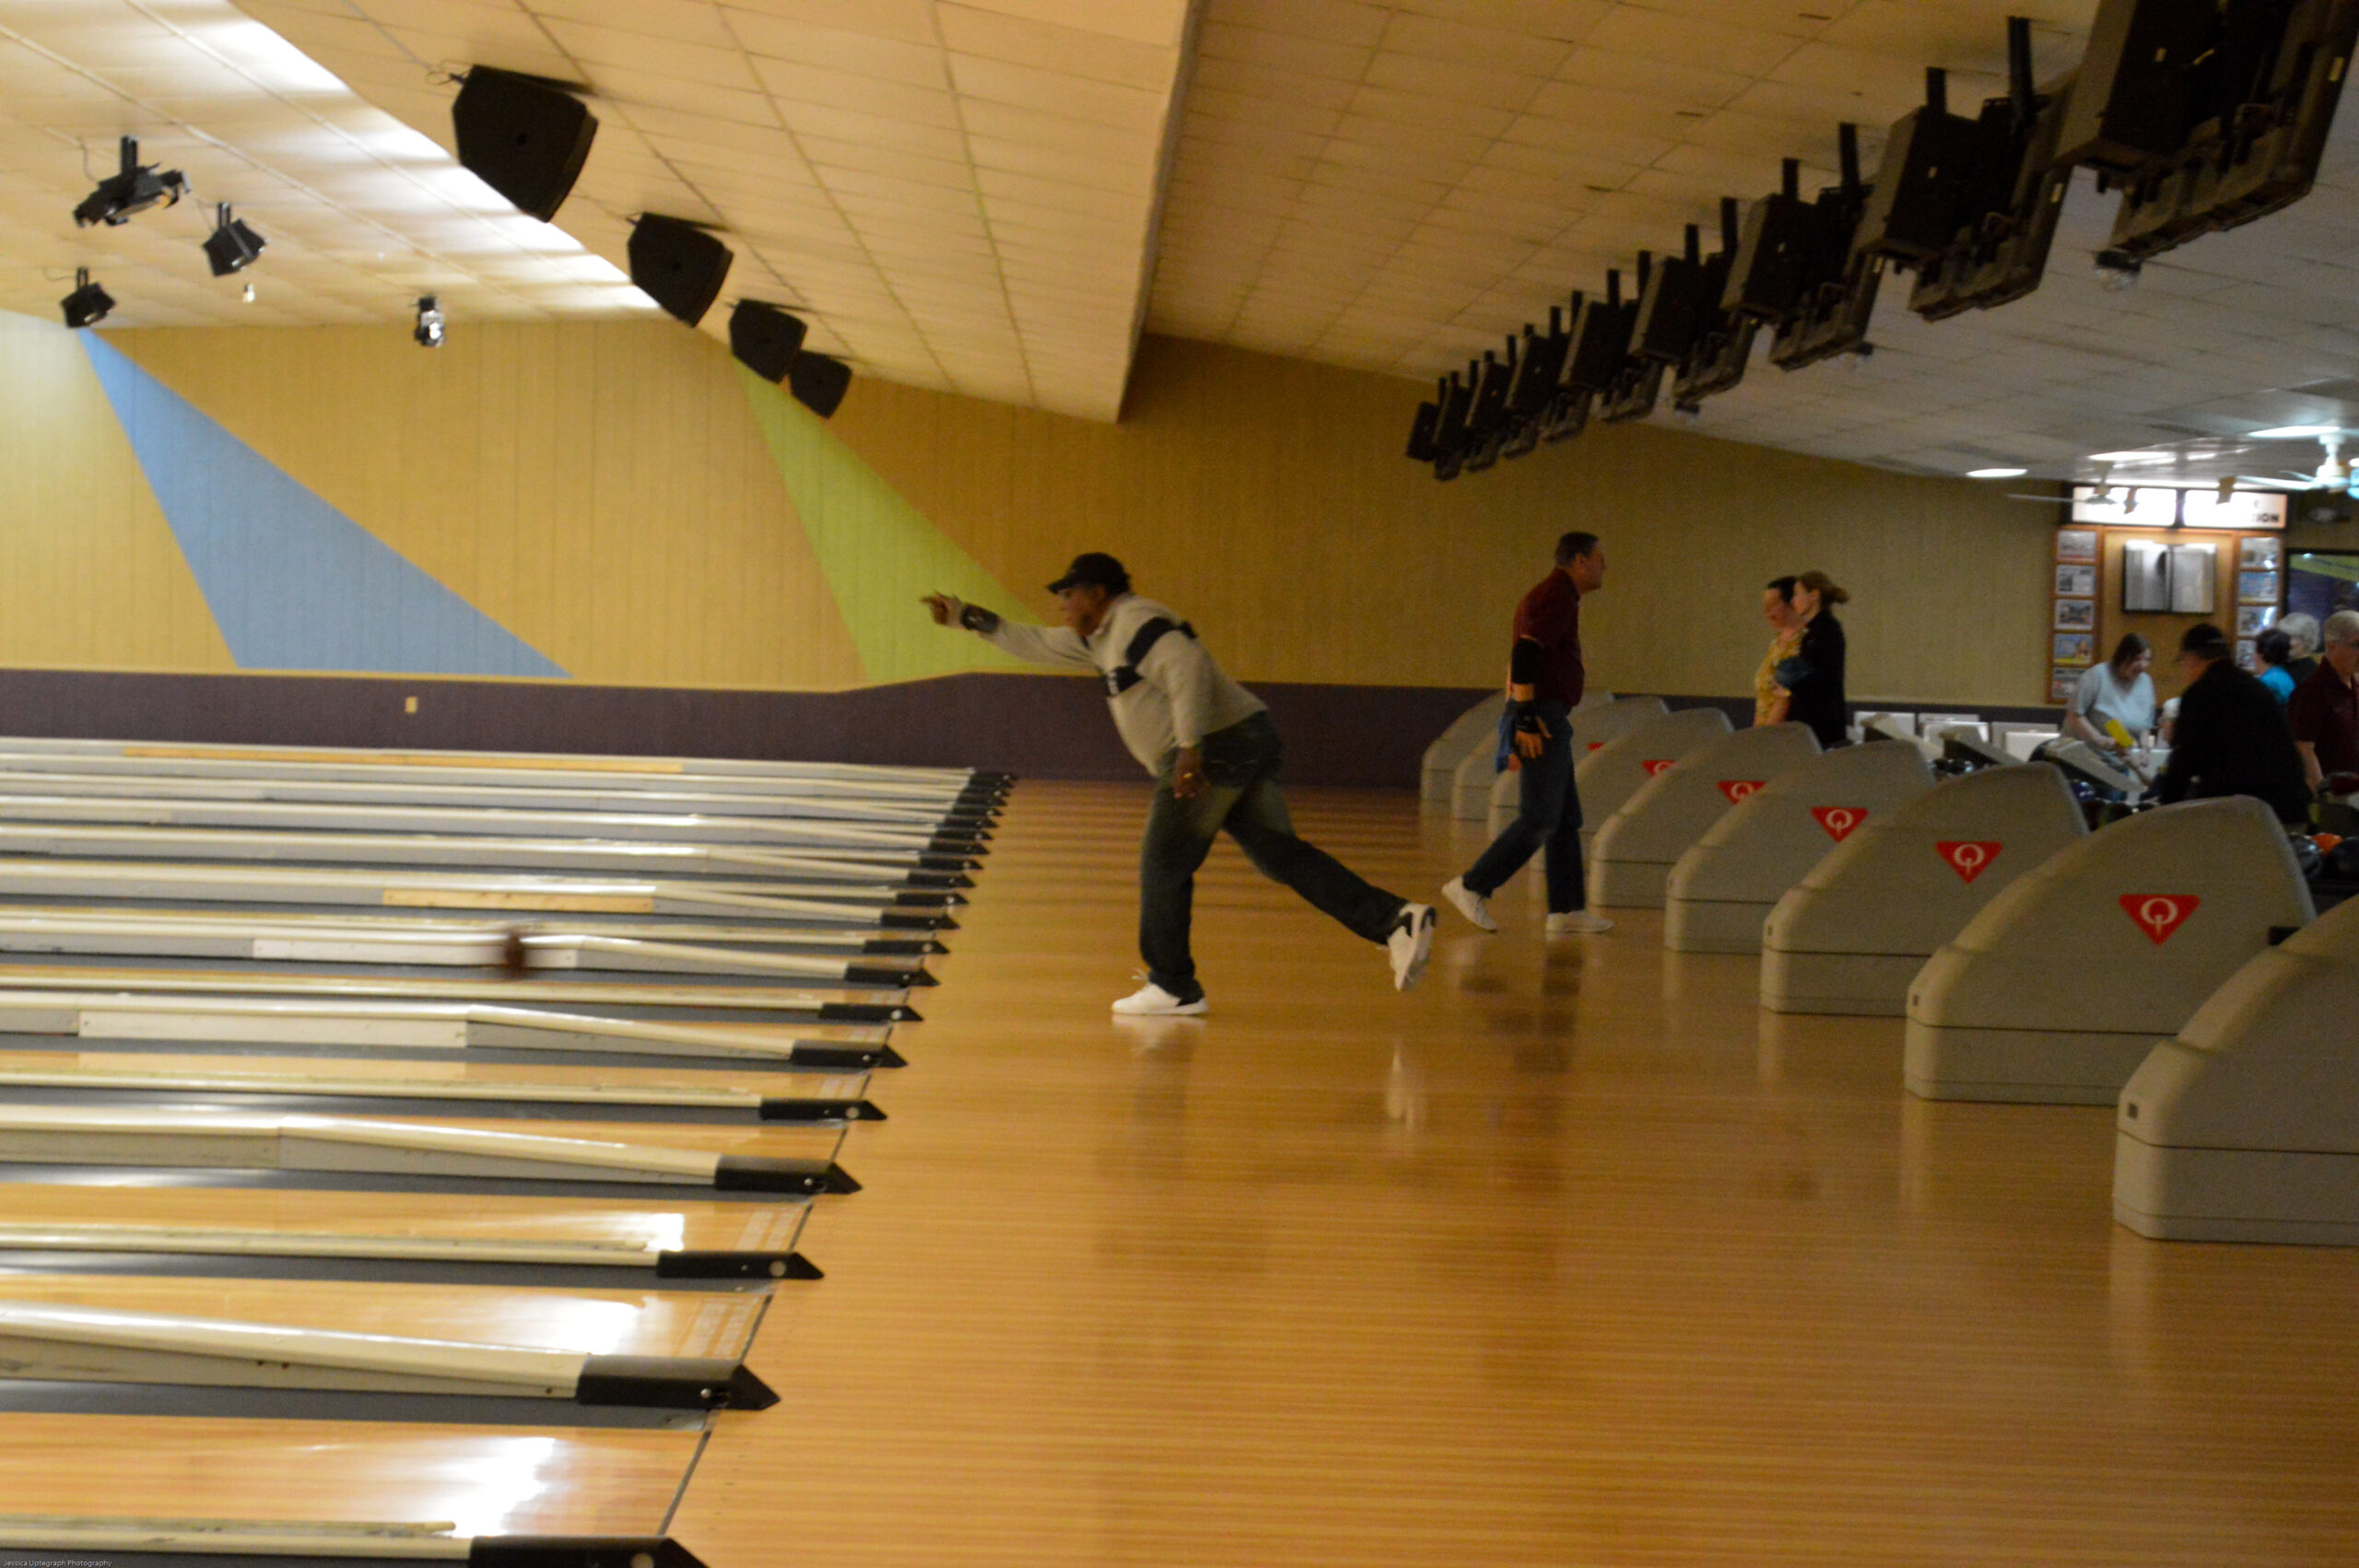 Family Fun: Why Bowling Is the Perfect Activity for the Whole Family